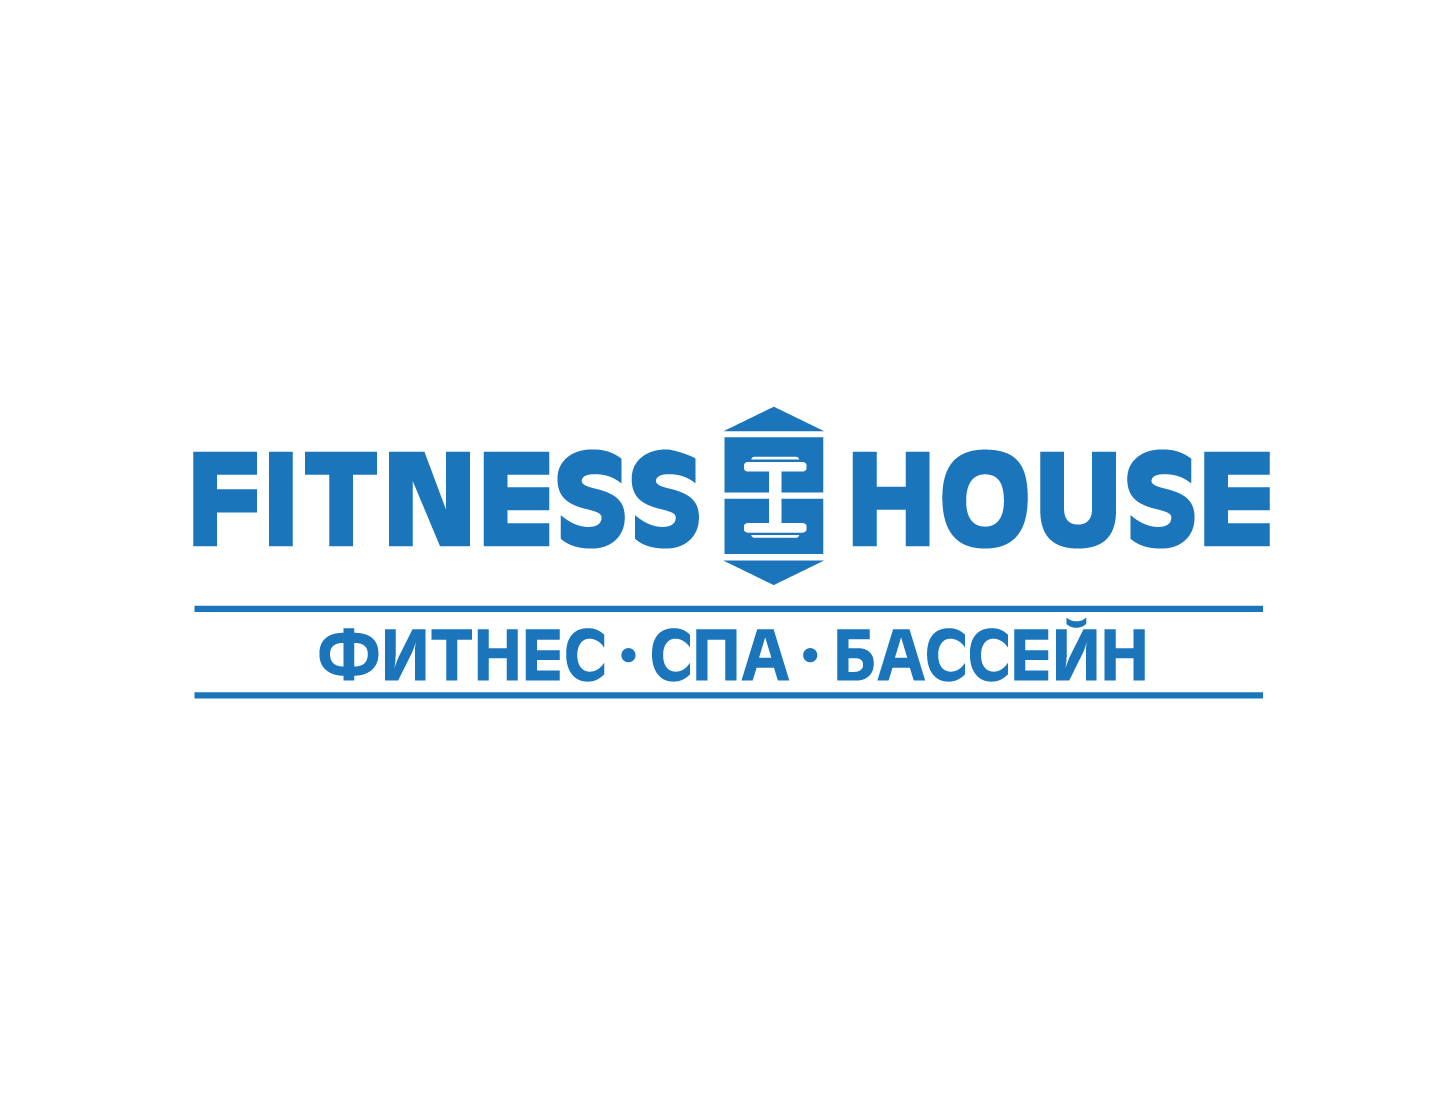   Fitness House